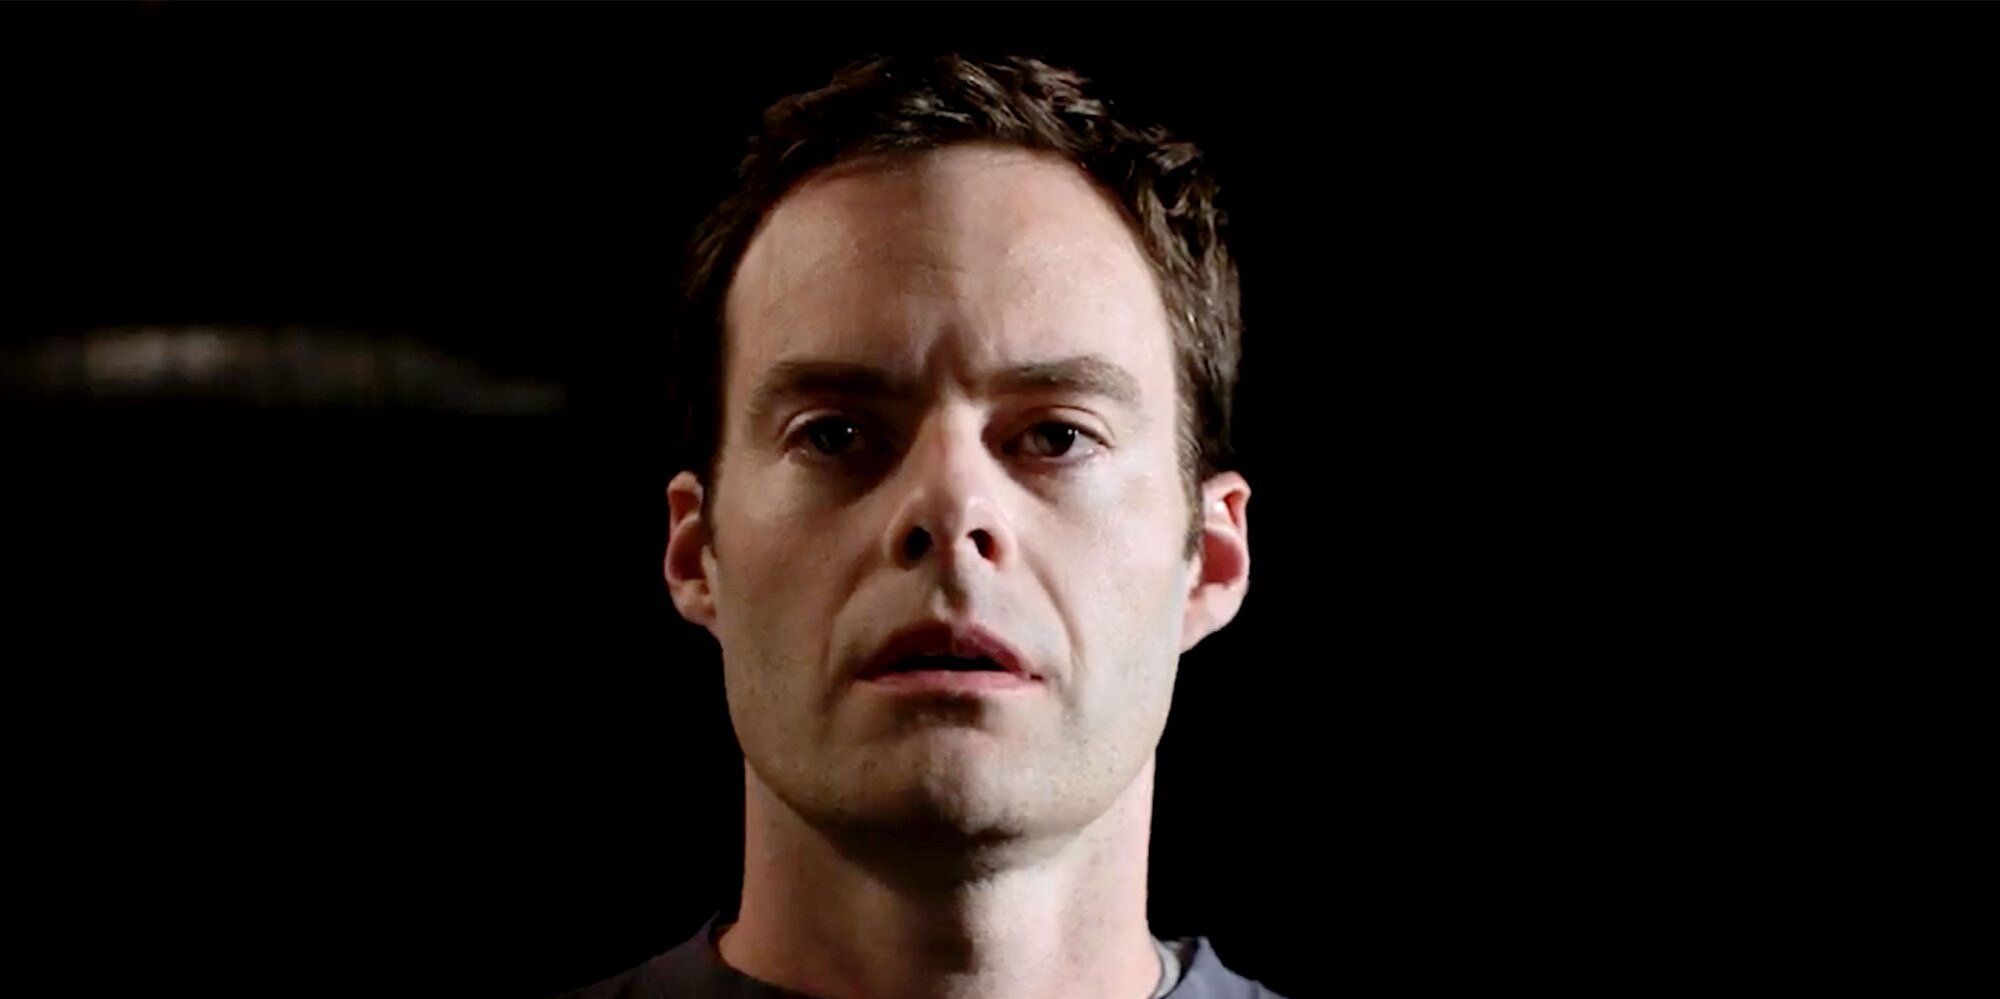 Bill Hader becomes a hitman in new trailer for HBO's 'Barry'